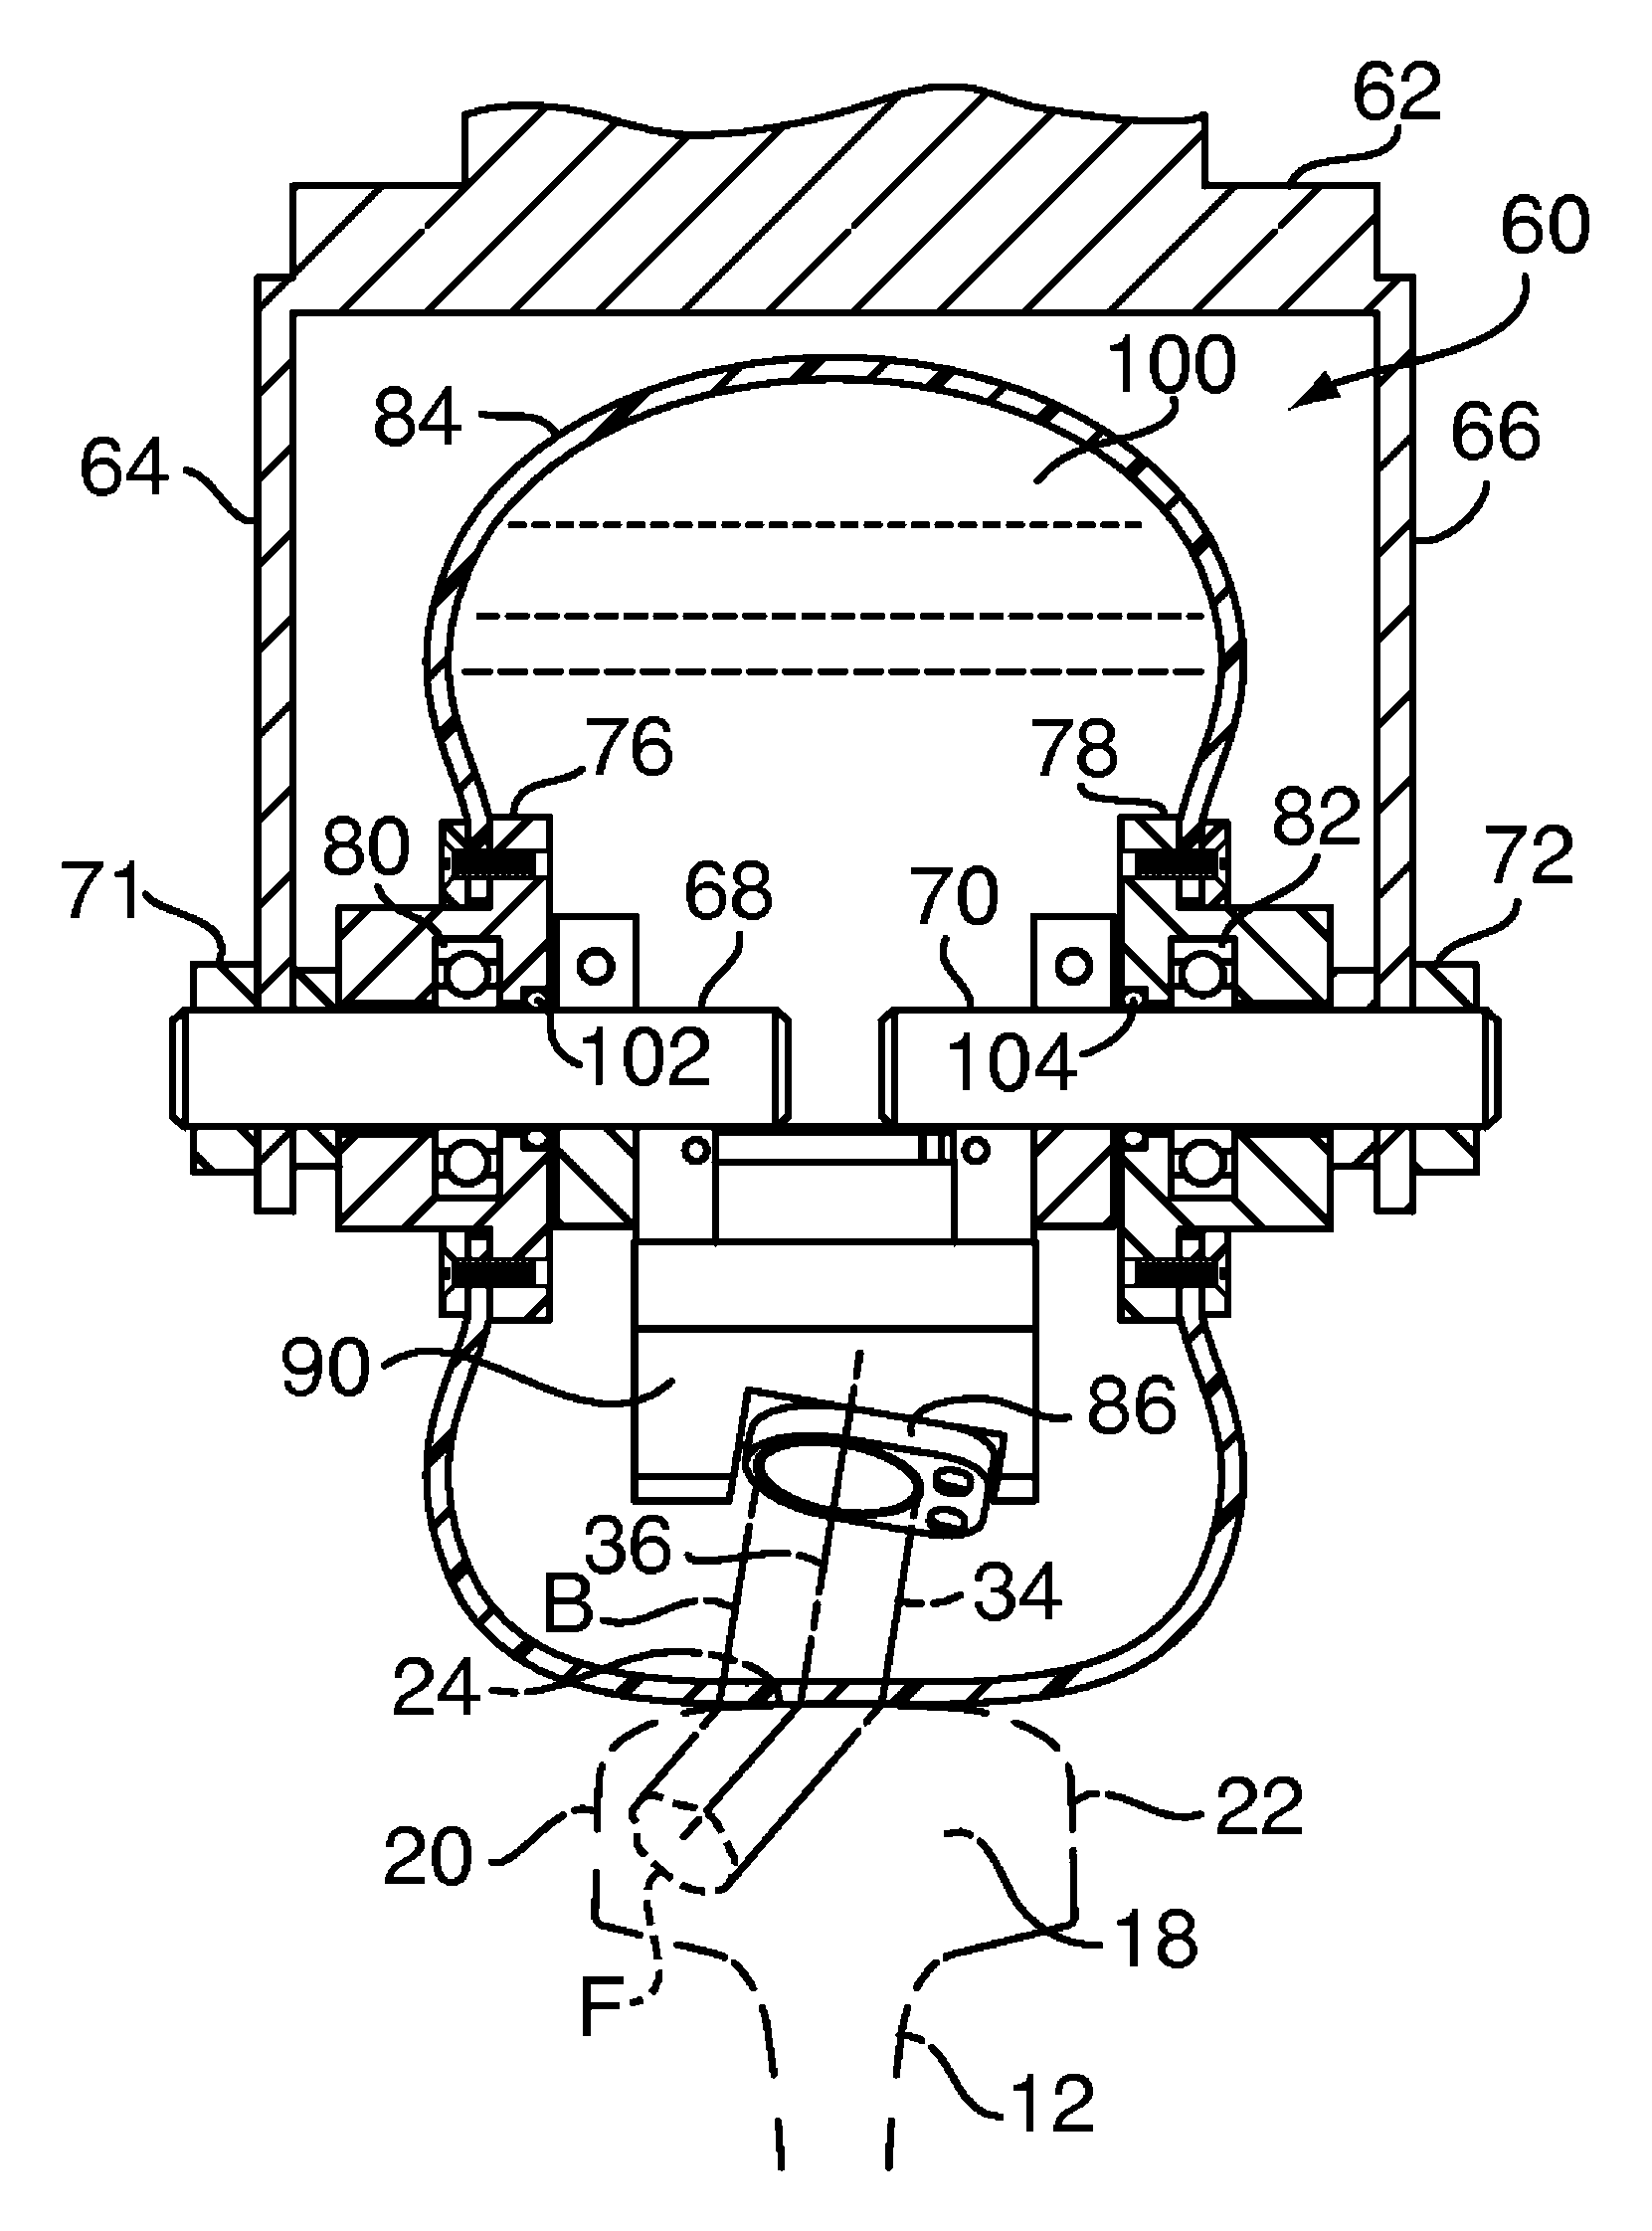 Method of and an apparatus for in situ ultrasonic rail inspection of a railroad rail